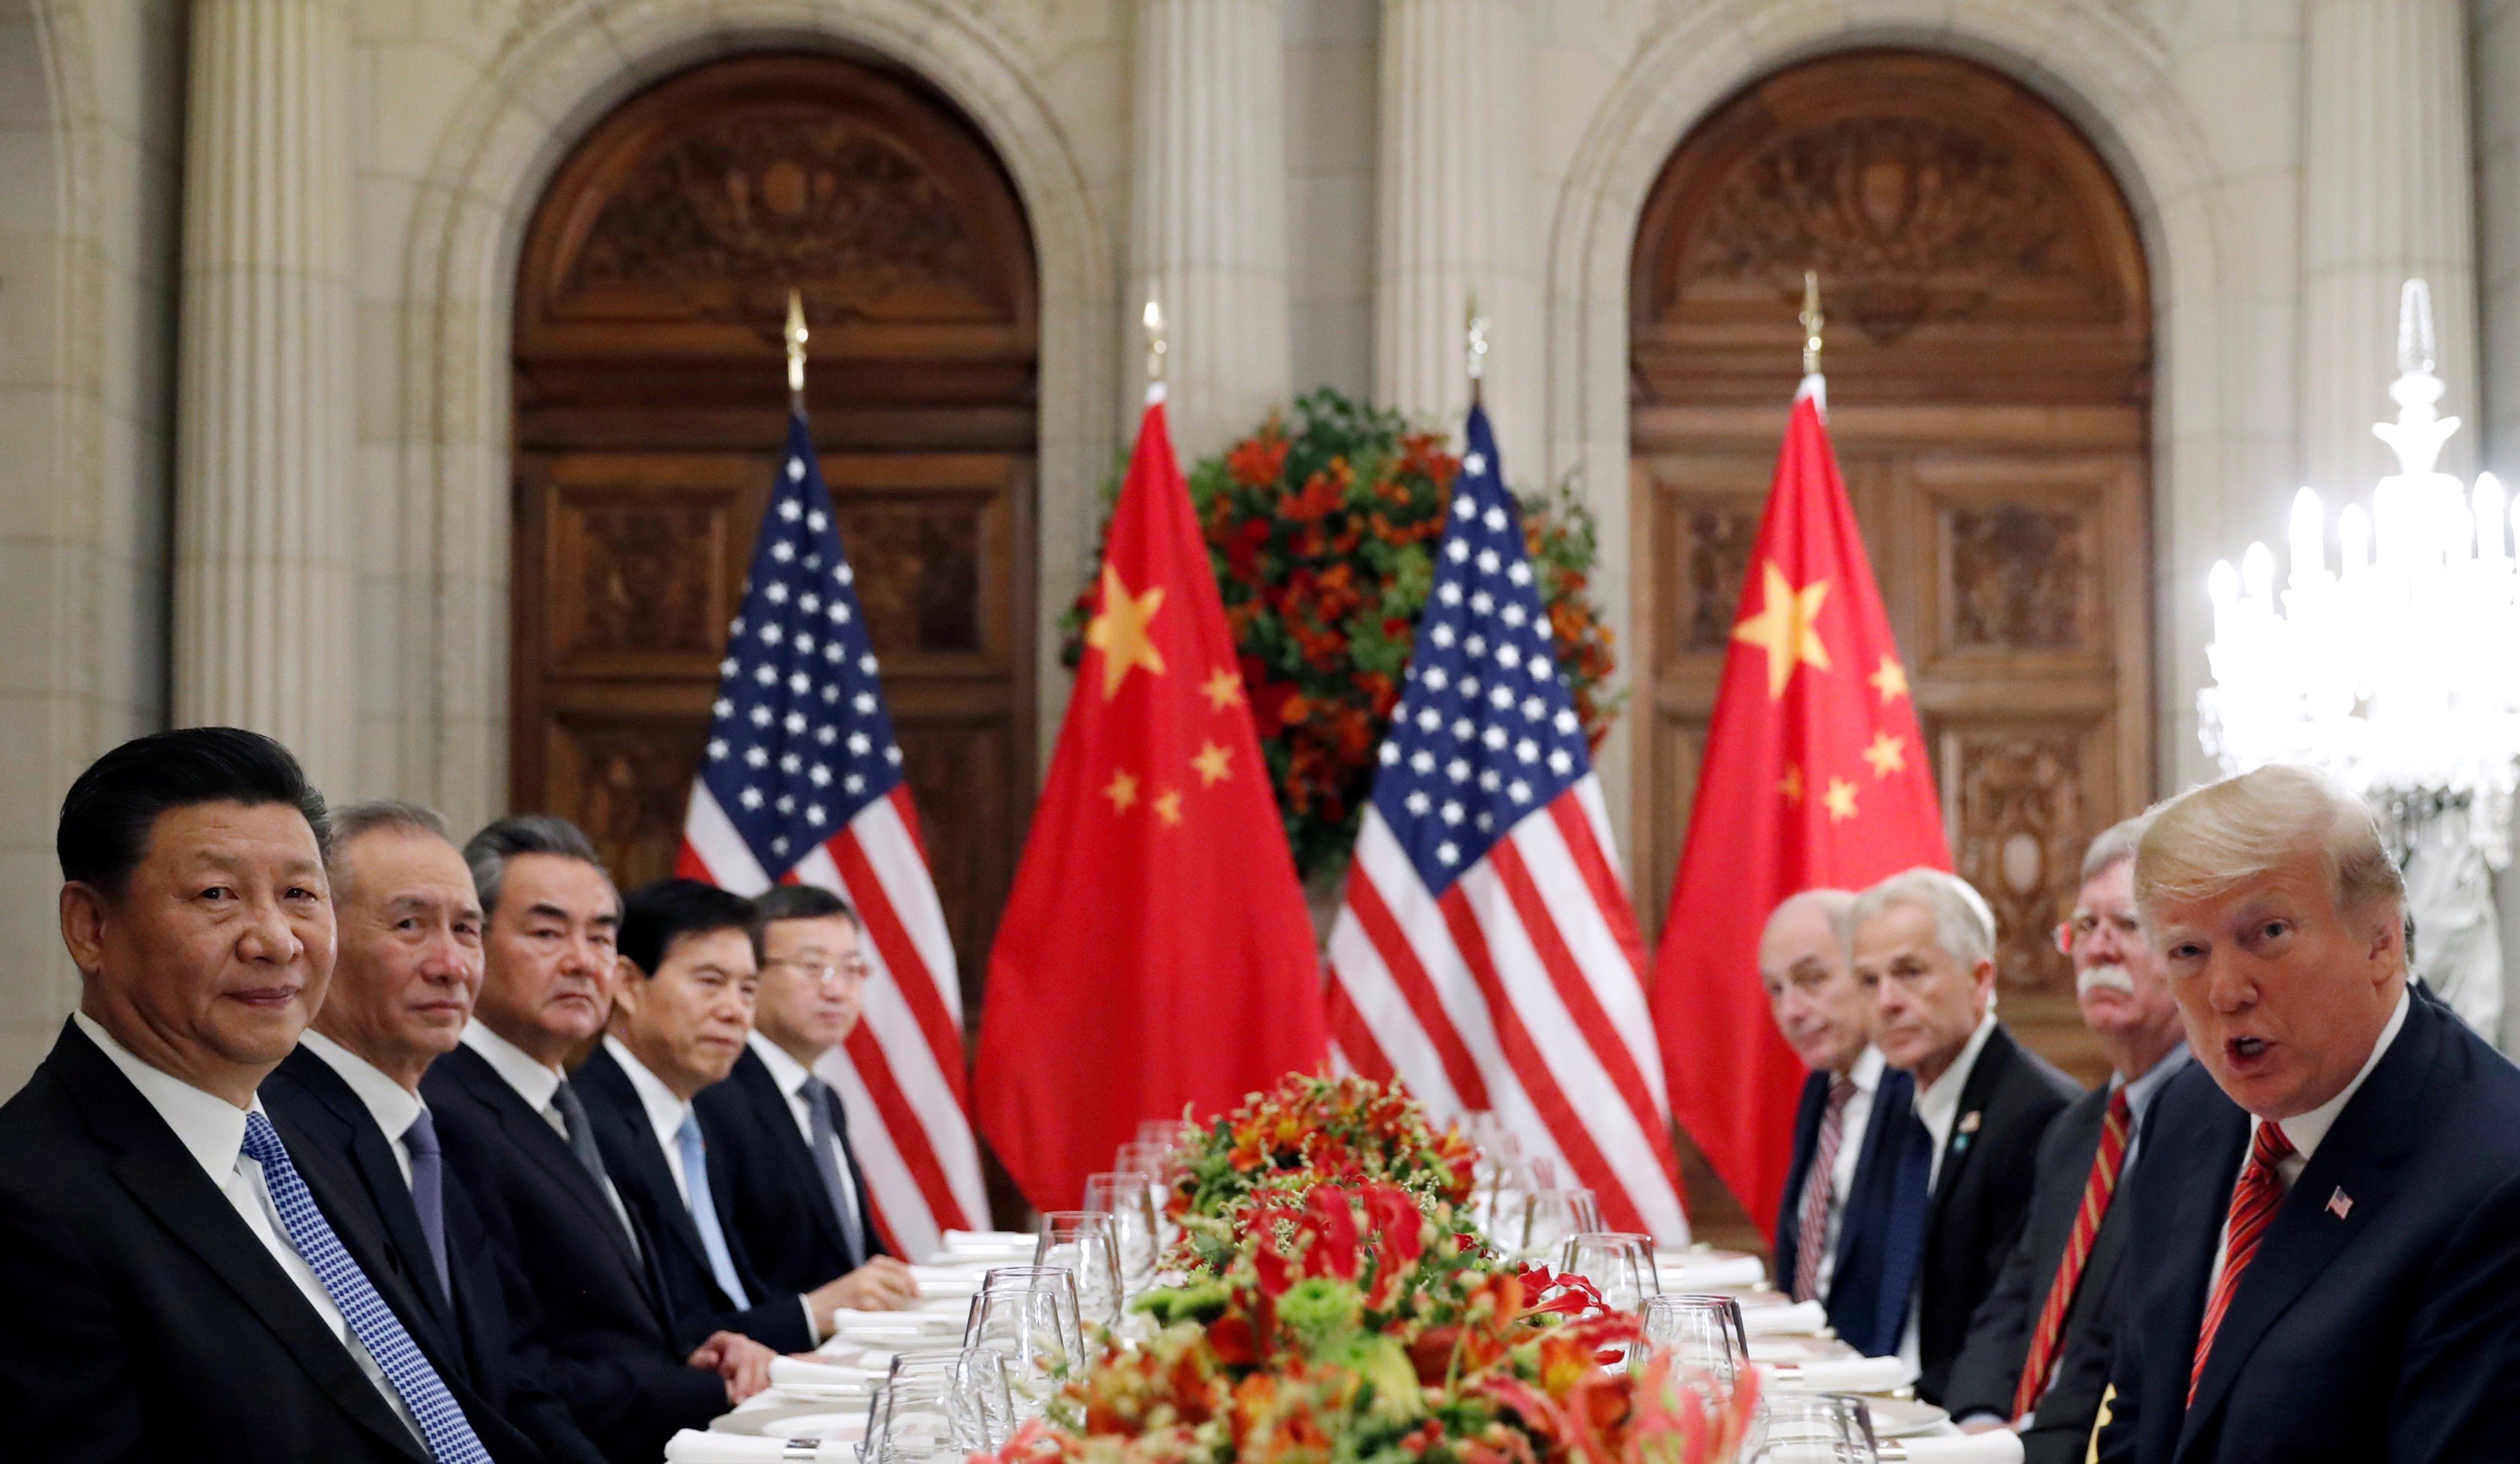 Chinese President Xi Jinping and US President Donald Trump attend a working dinner on the sidelines of the G20 leaders summit in Buenos Aires, Argentina. Photo: Reuters